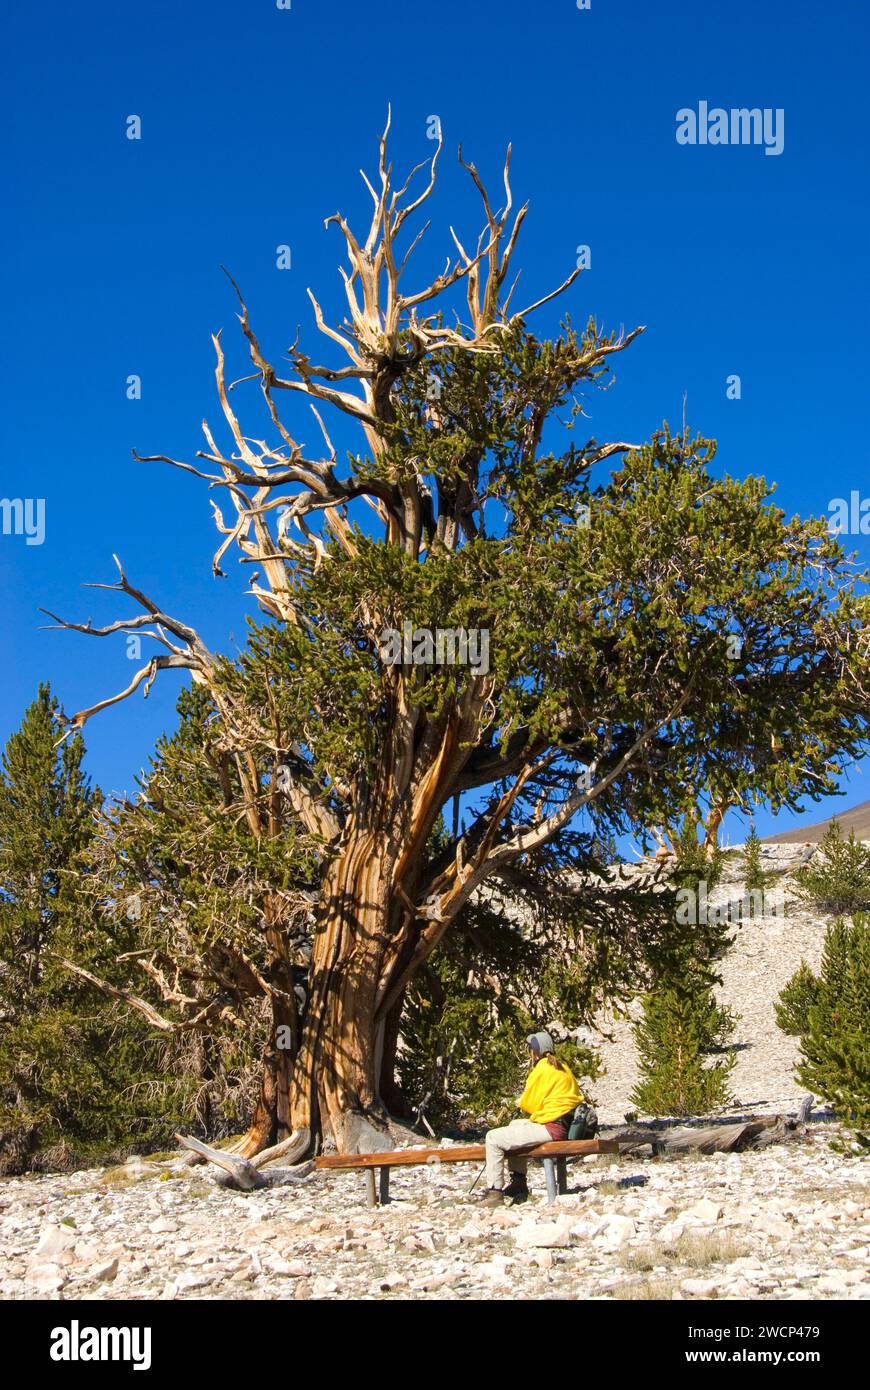 Bristlecone Pine Grove, ancien Patriarche de Bristlecone Pine Forest, ancien Bristlecone National Scenic Byway, Inyo National Forest, Californie Banque D'Images